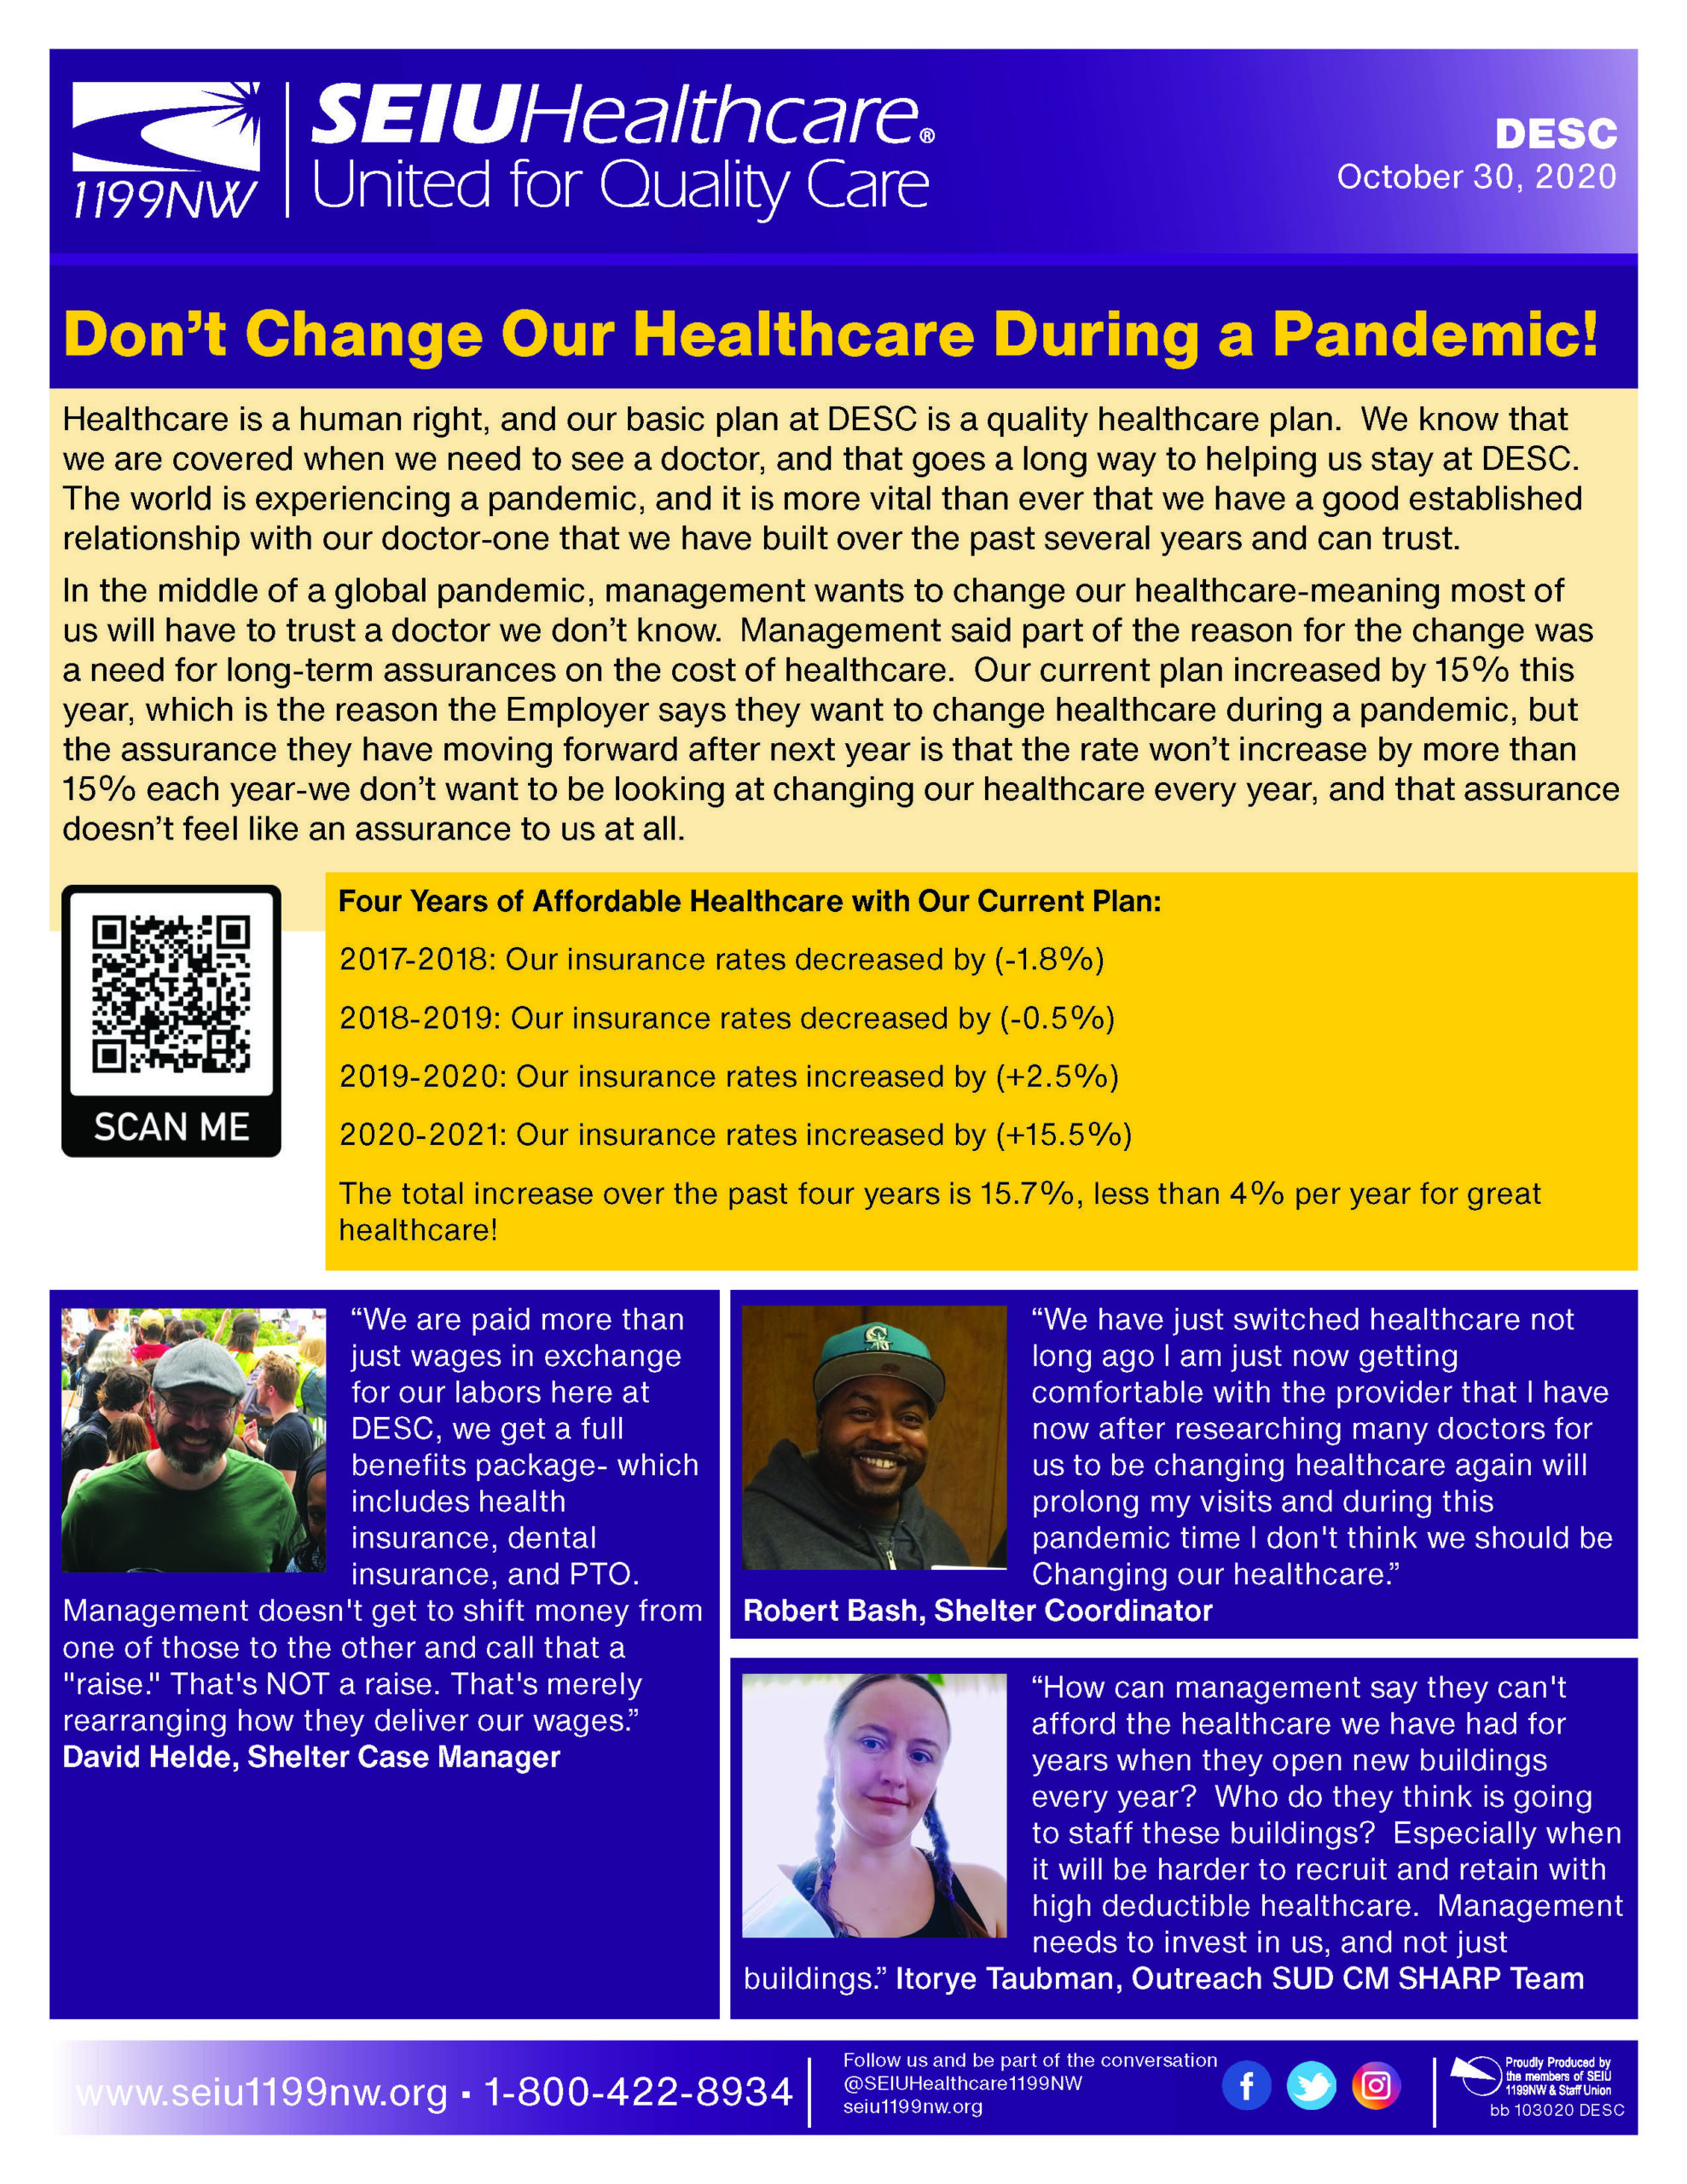 Don’t Change Our Healthcare During a Pandemic!